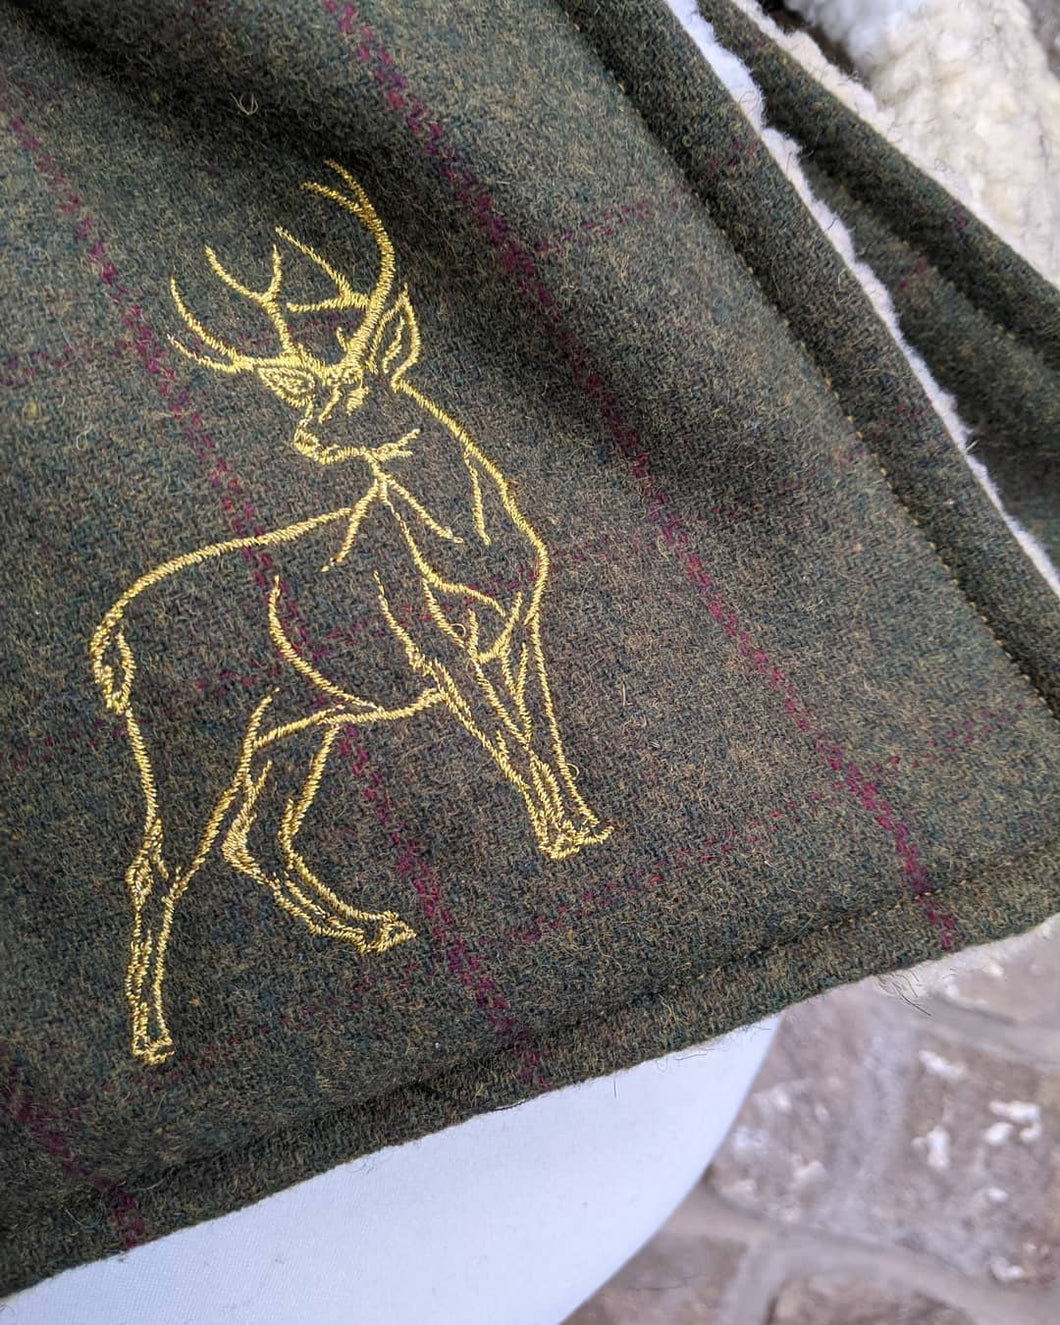 Wool with stag embroidery scarf